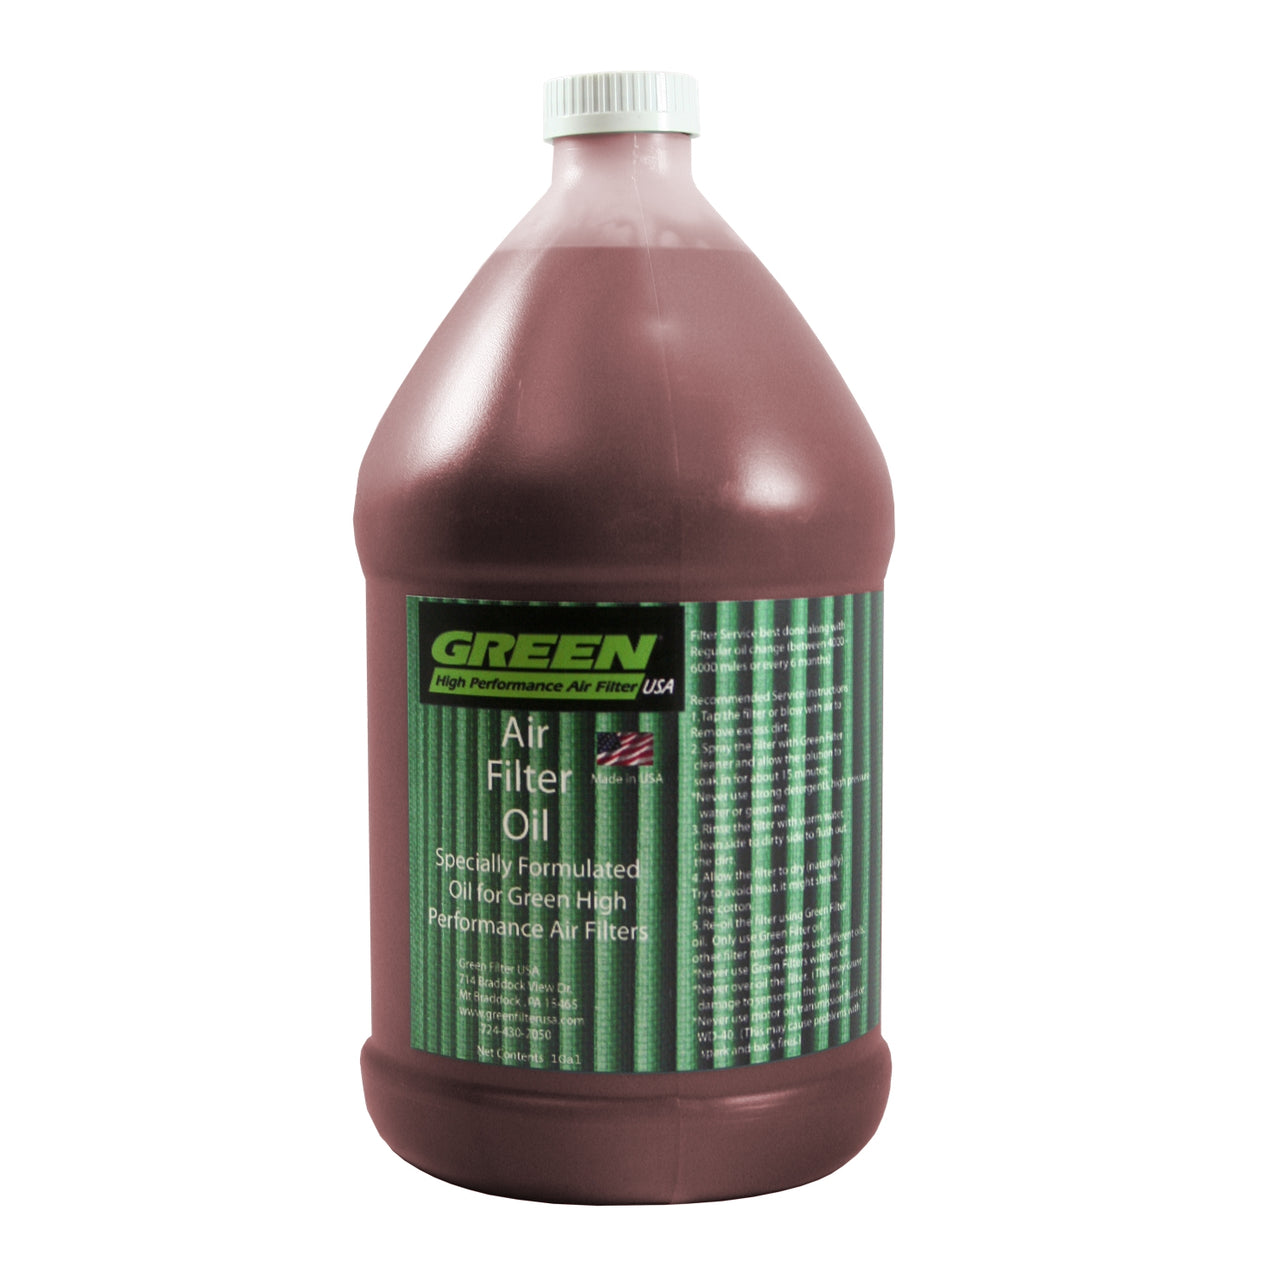 Green Filter Air Filter Synthetic Oil (Red) - 1 Gal. Refill